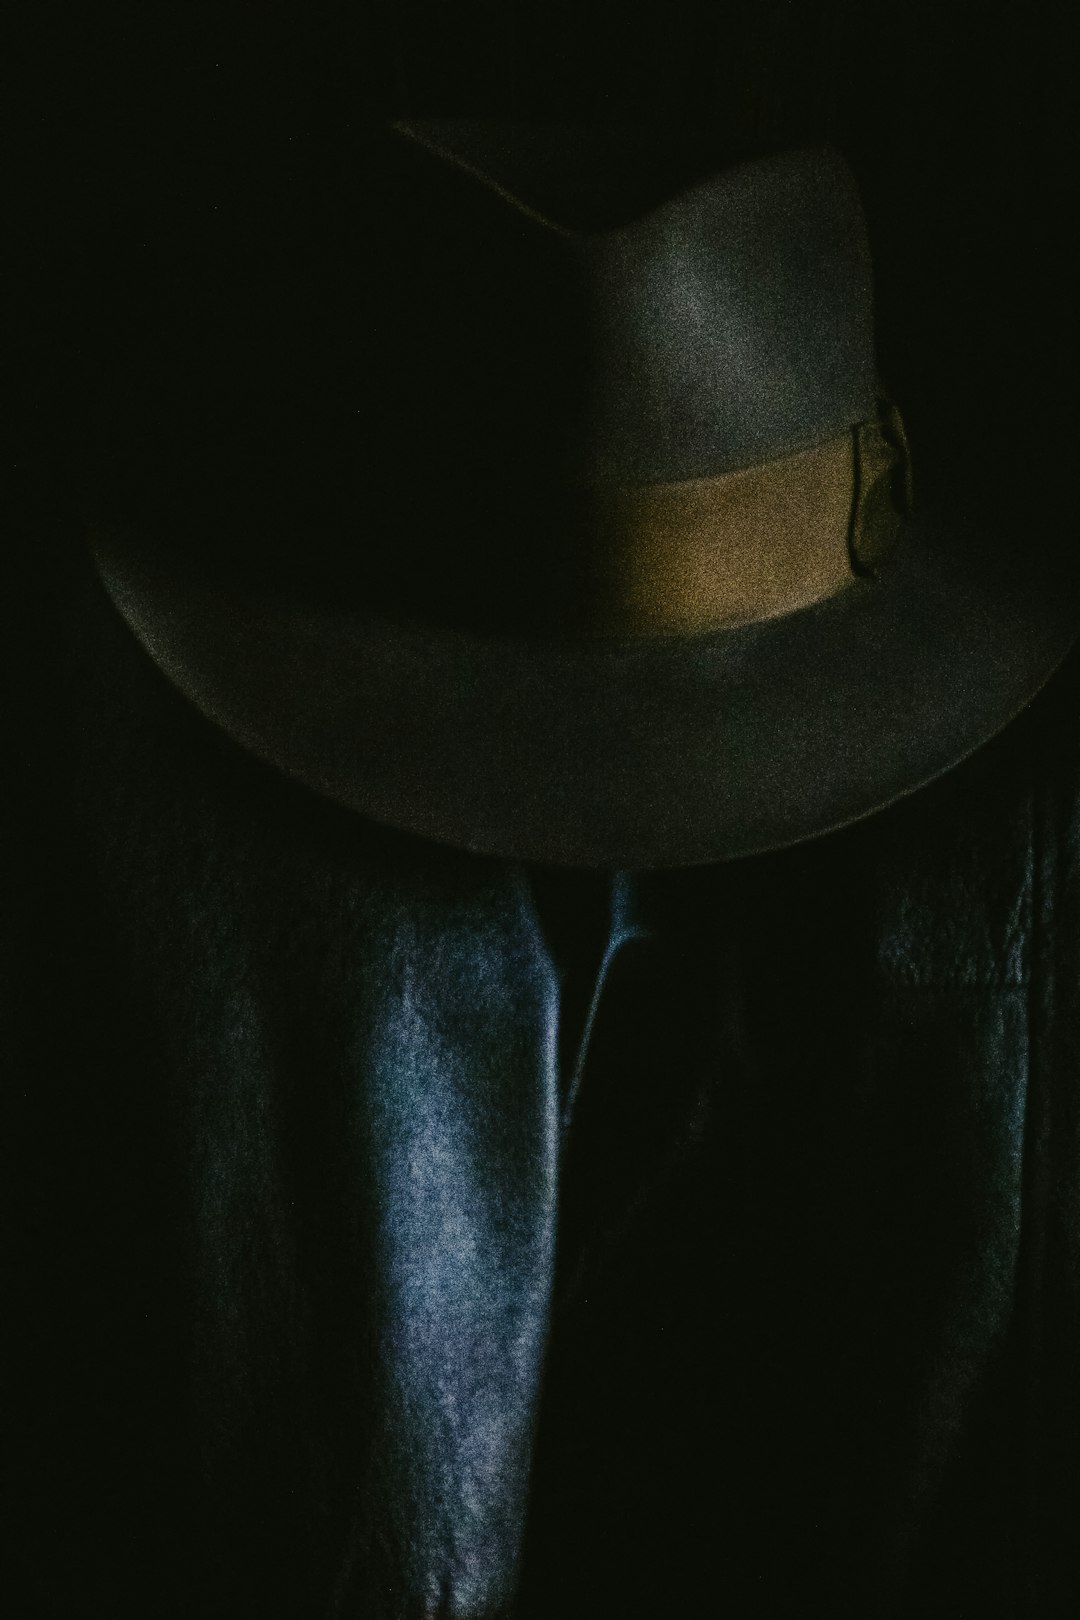 I shot this when I was looking for stuff to shoot around the house. Sometimes I give myself rules like “cannot leave the house” or “must be taken on the hour” to spark creativity. This is my hat and leather jacket on the back of the couch. Light from the door.